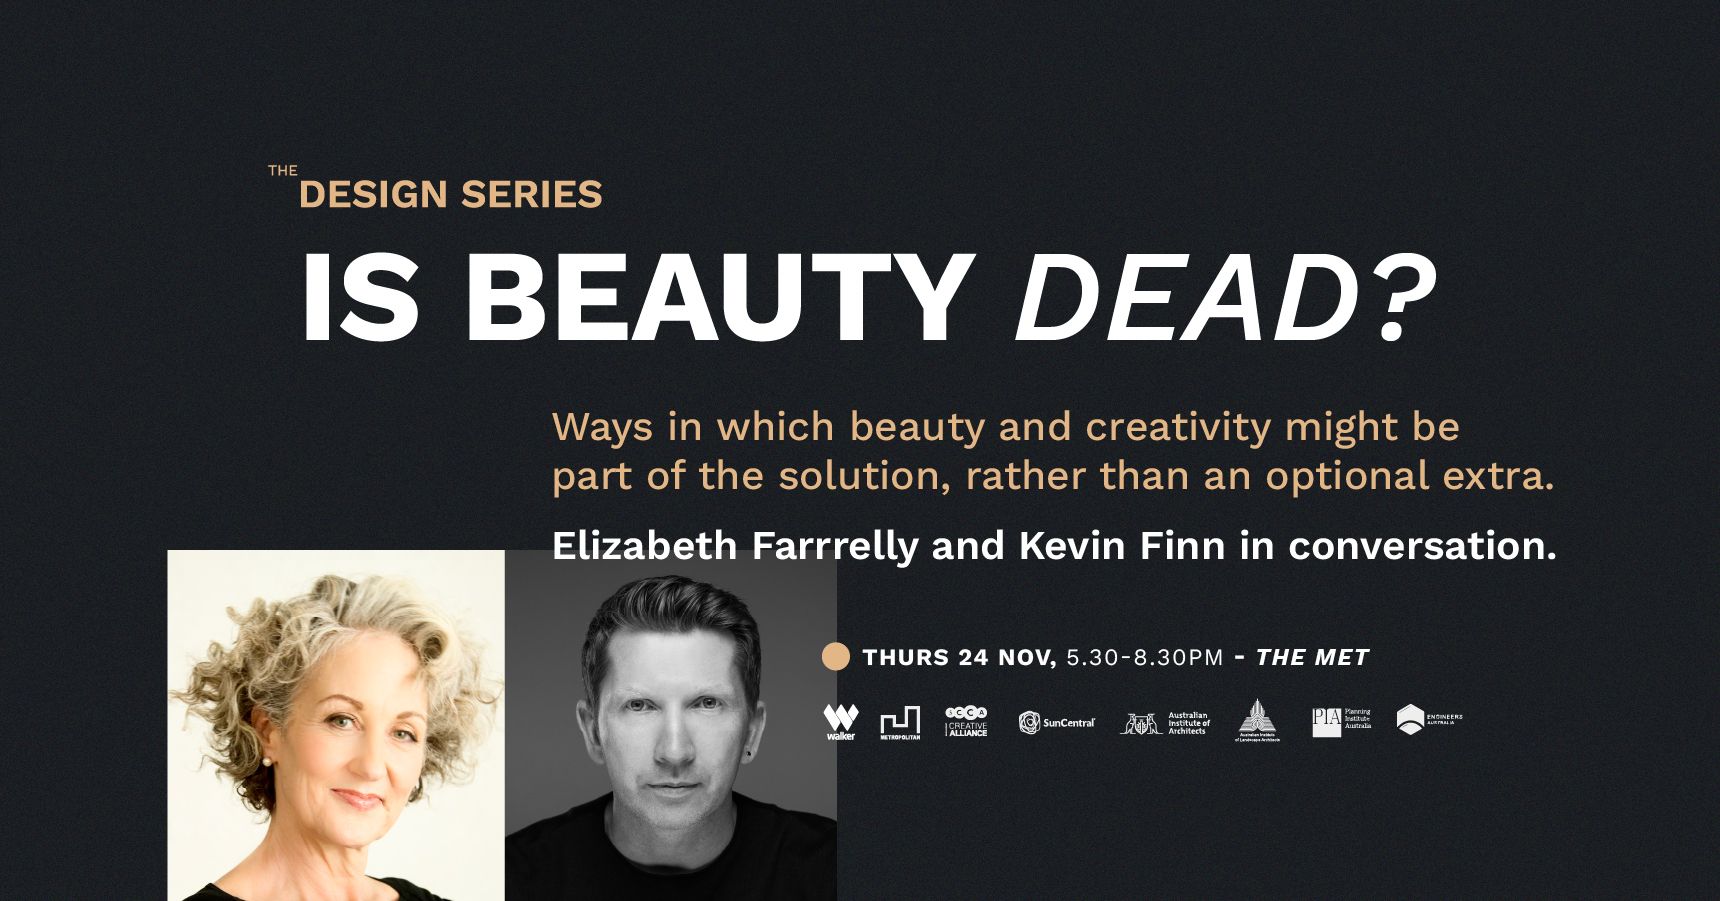 The Design Series | Is BEAUTY DEAD? feature image